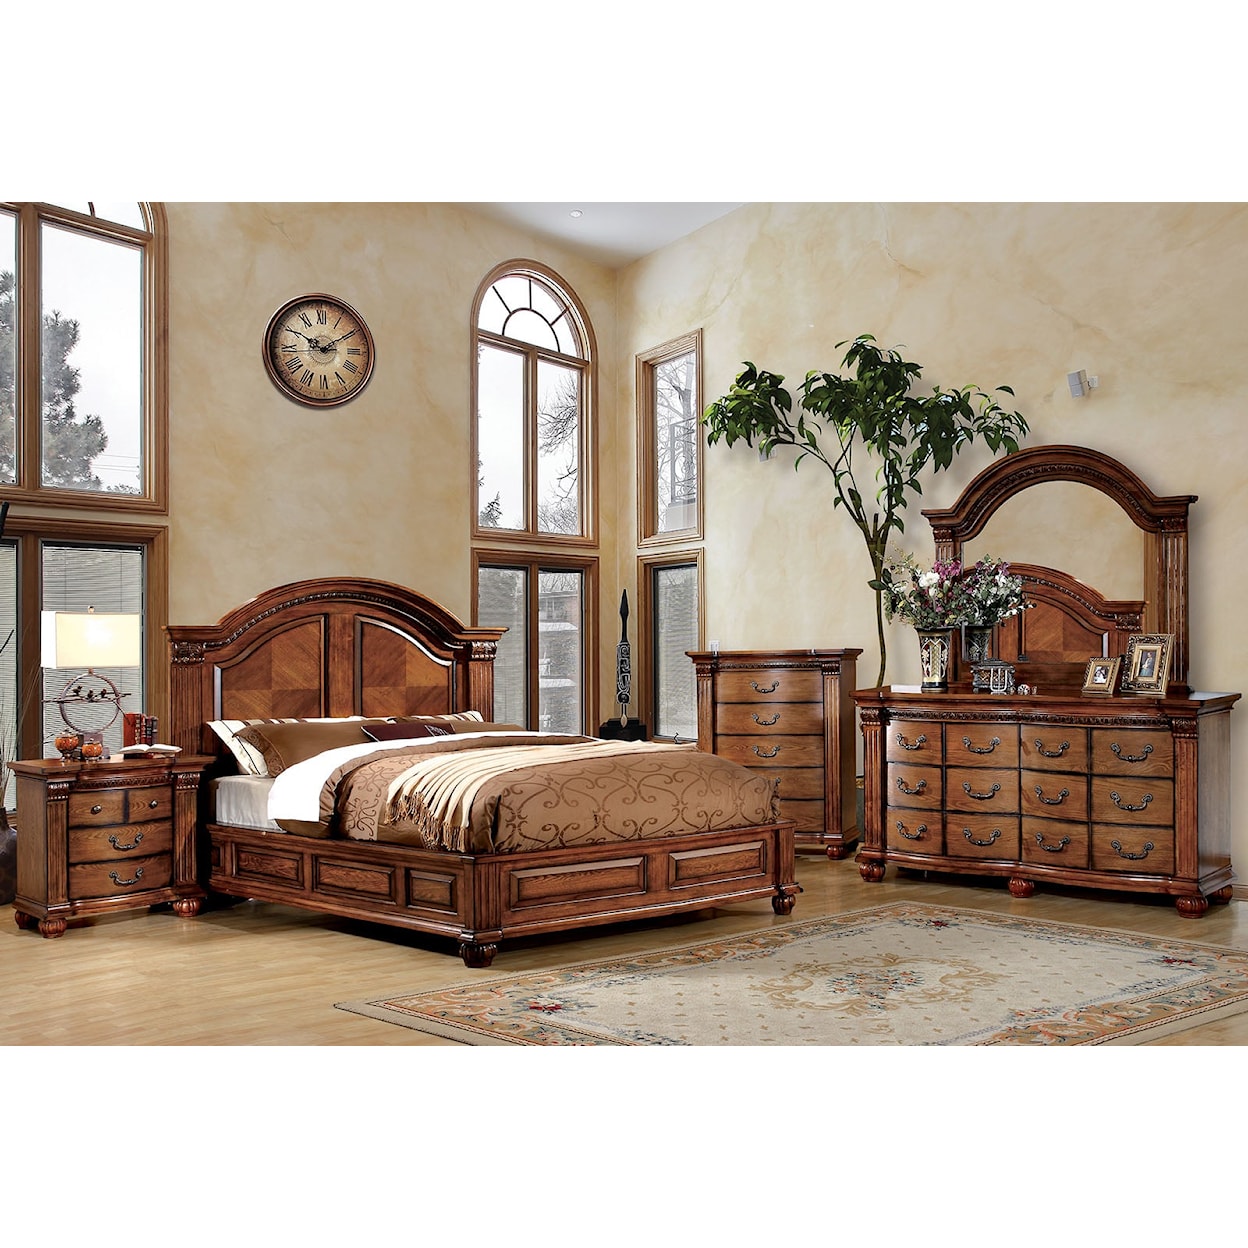 Furniture of America Bellagrand 5 Pc. Queen Bedroom Set w/ Chest